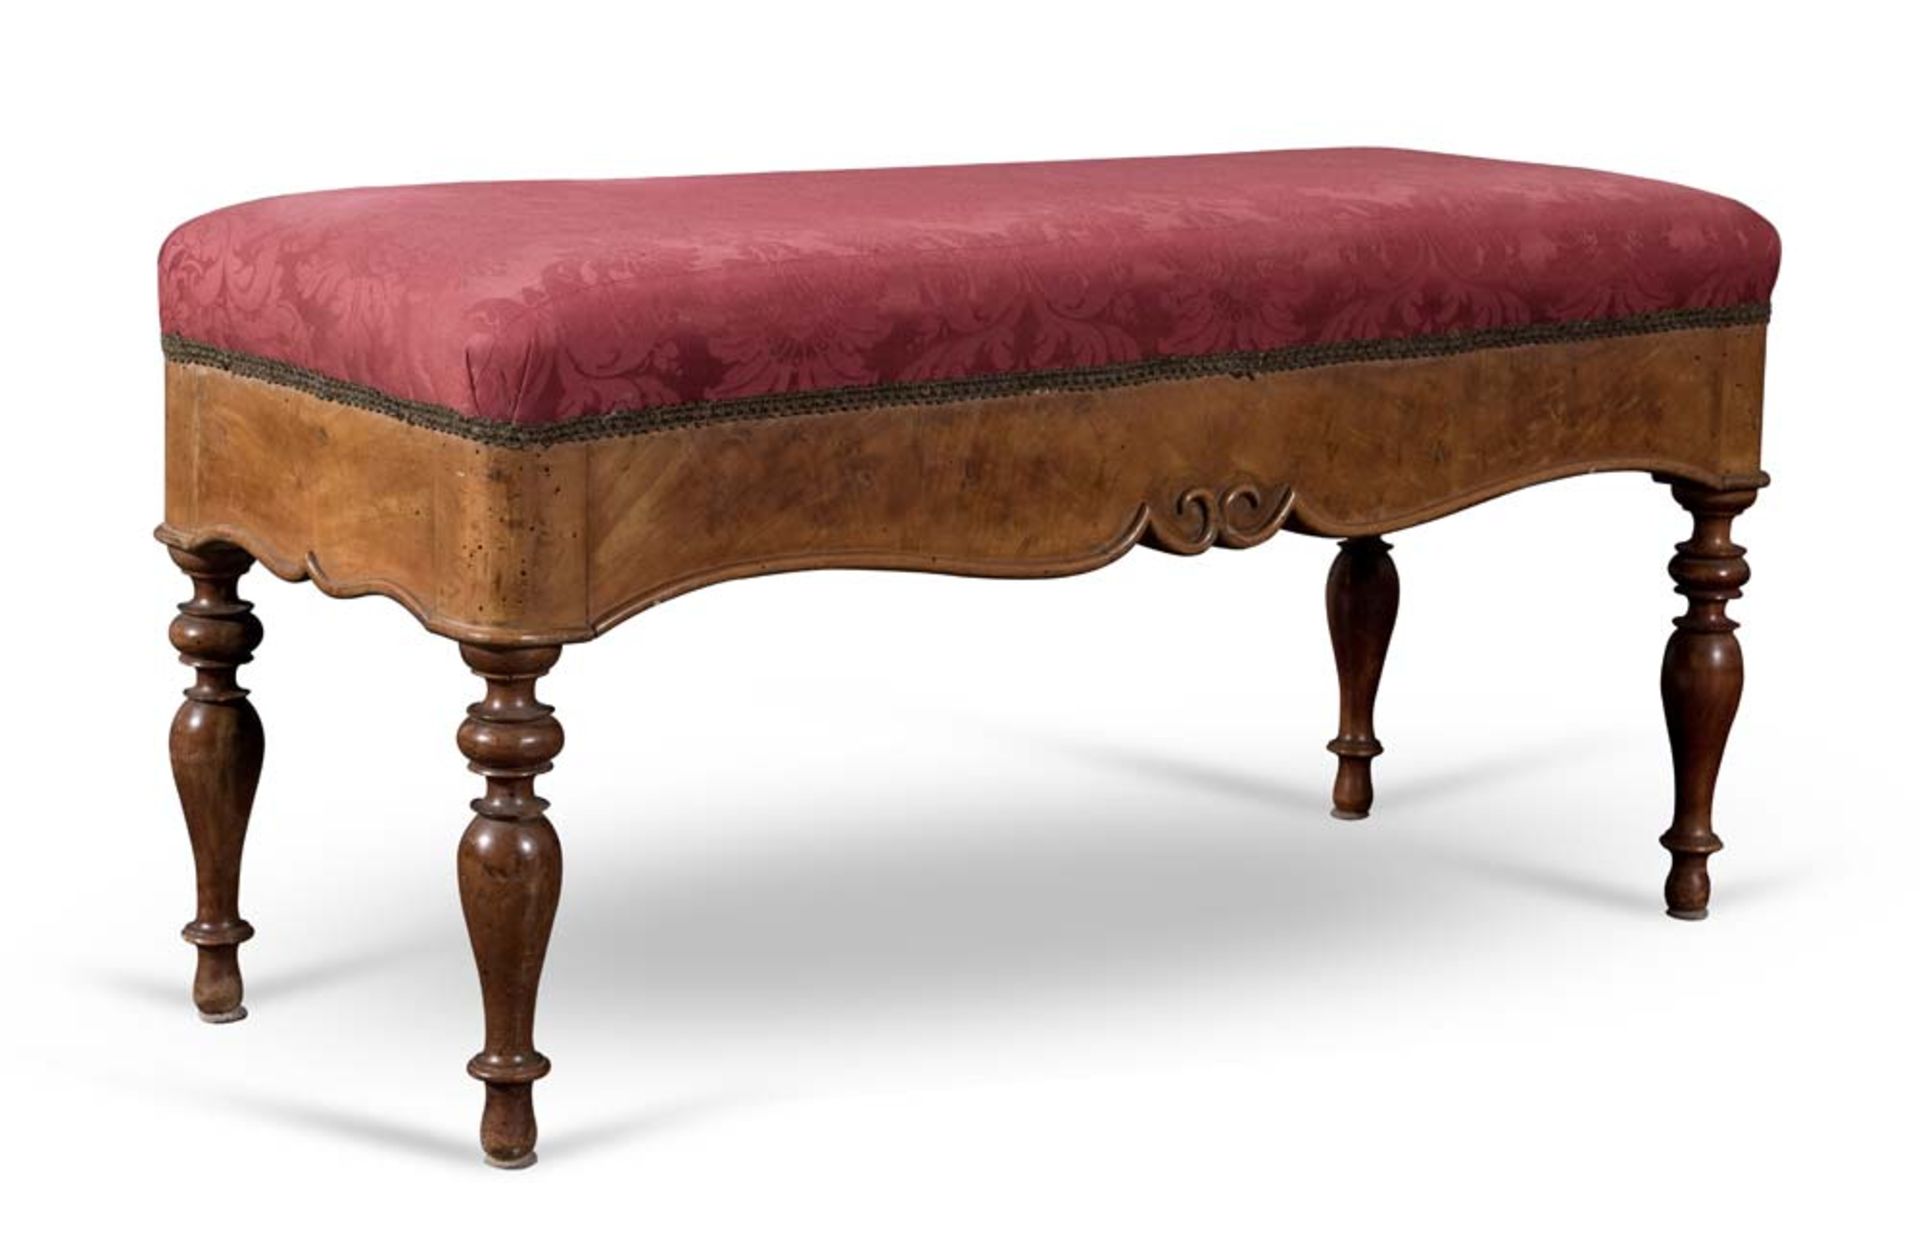 Small wood bench with red upholstery, late 19th Century.